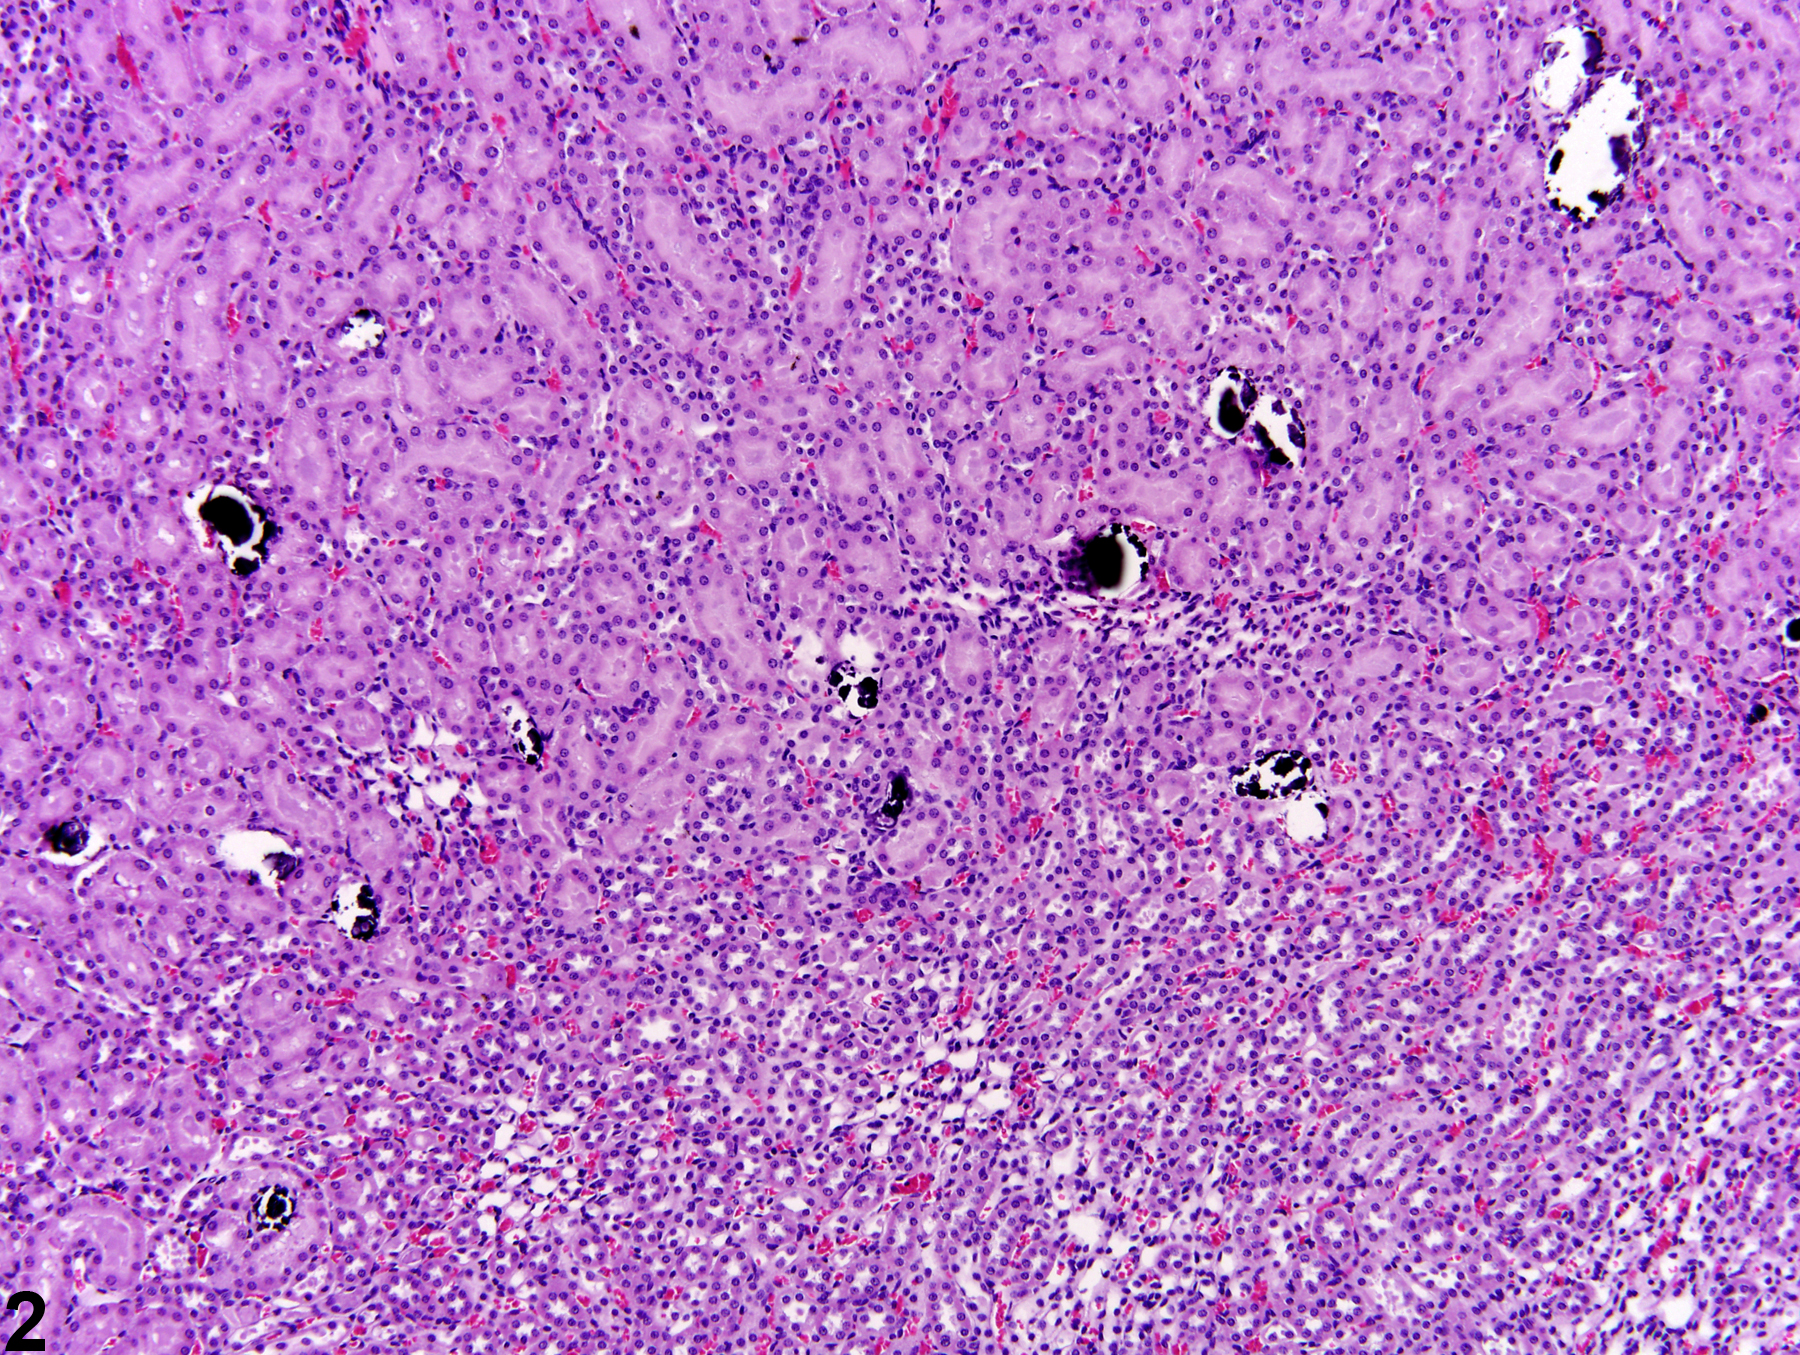 Image of mineralization in the kidney from a female Harlan Sprague-Dawley rat in an acute study